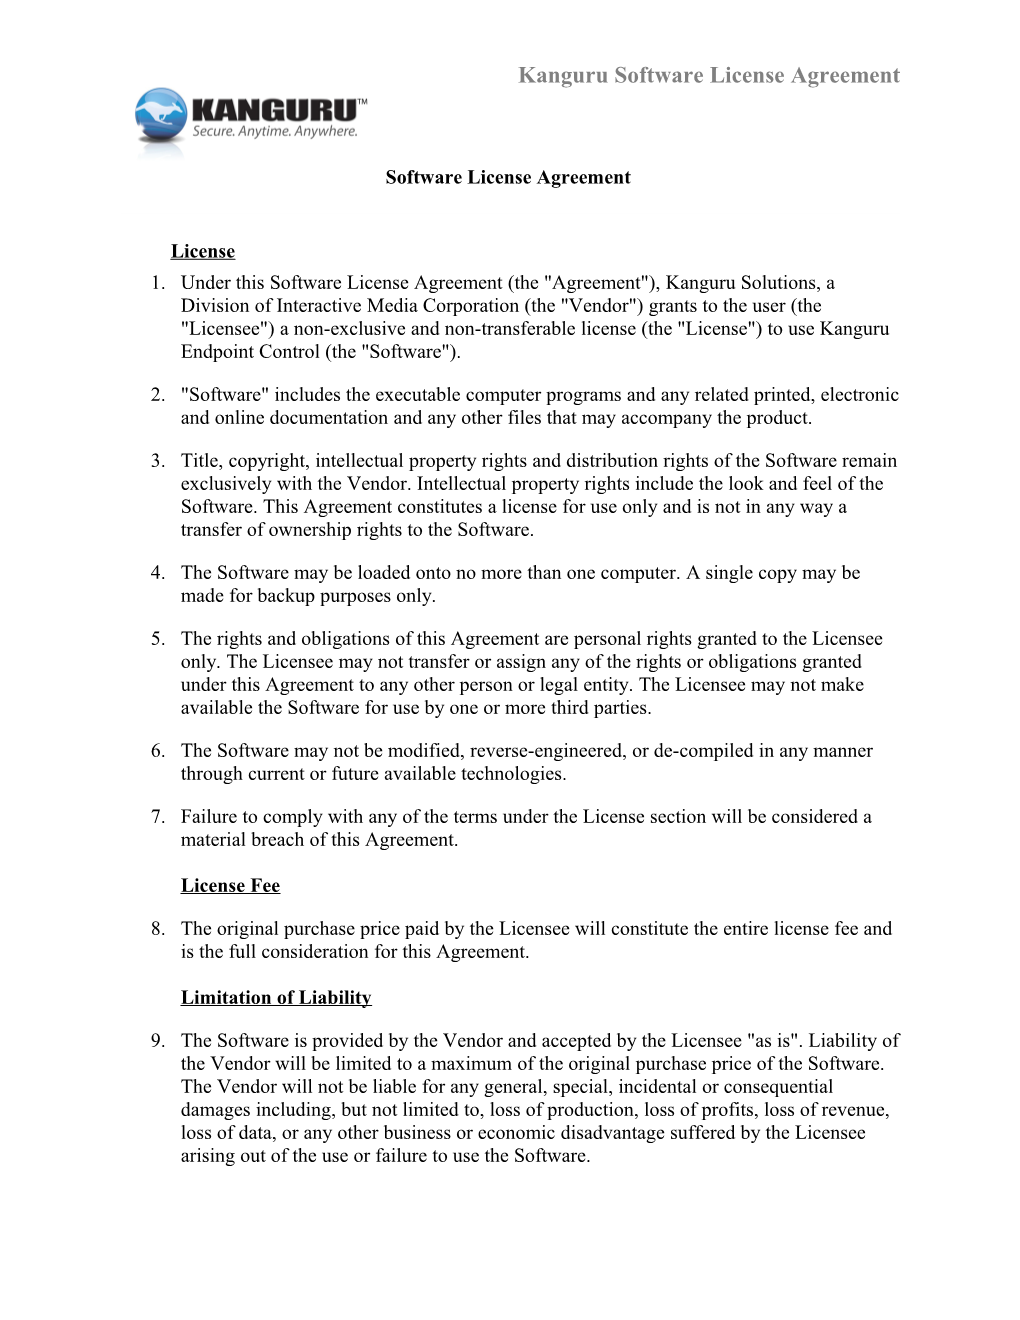 Under This Software License Agreement (The Agreement ), Kanguru Solutions, a Division Of